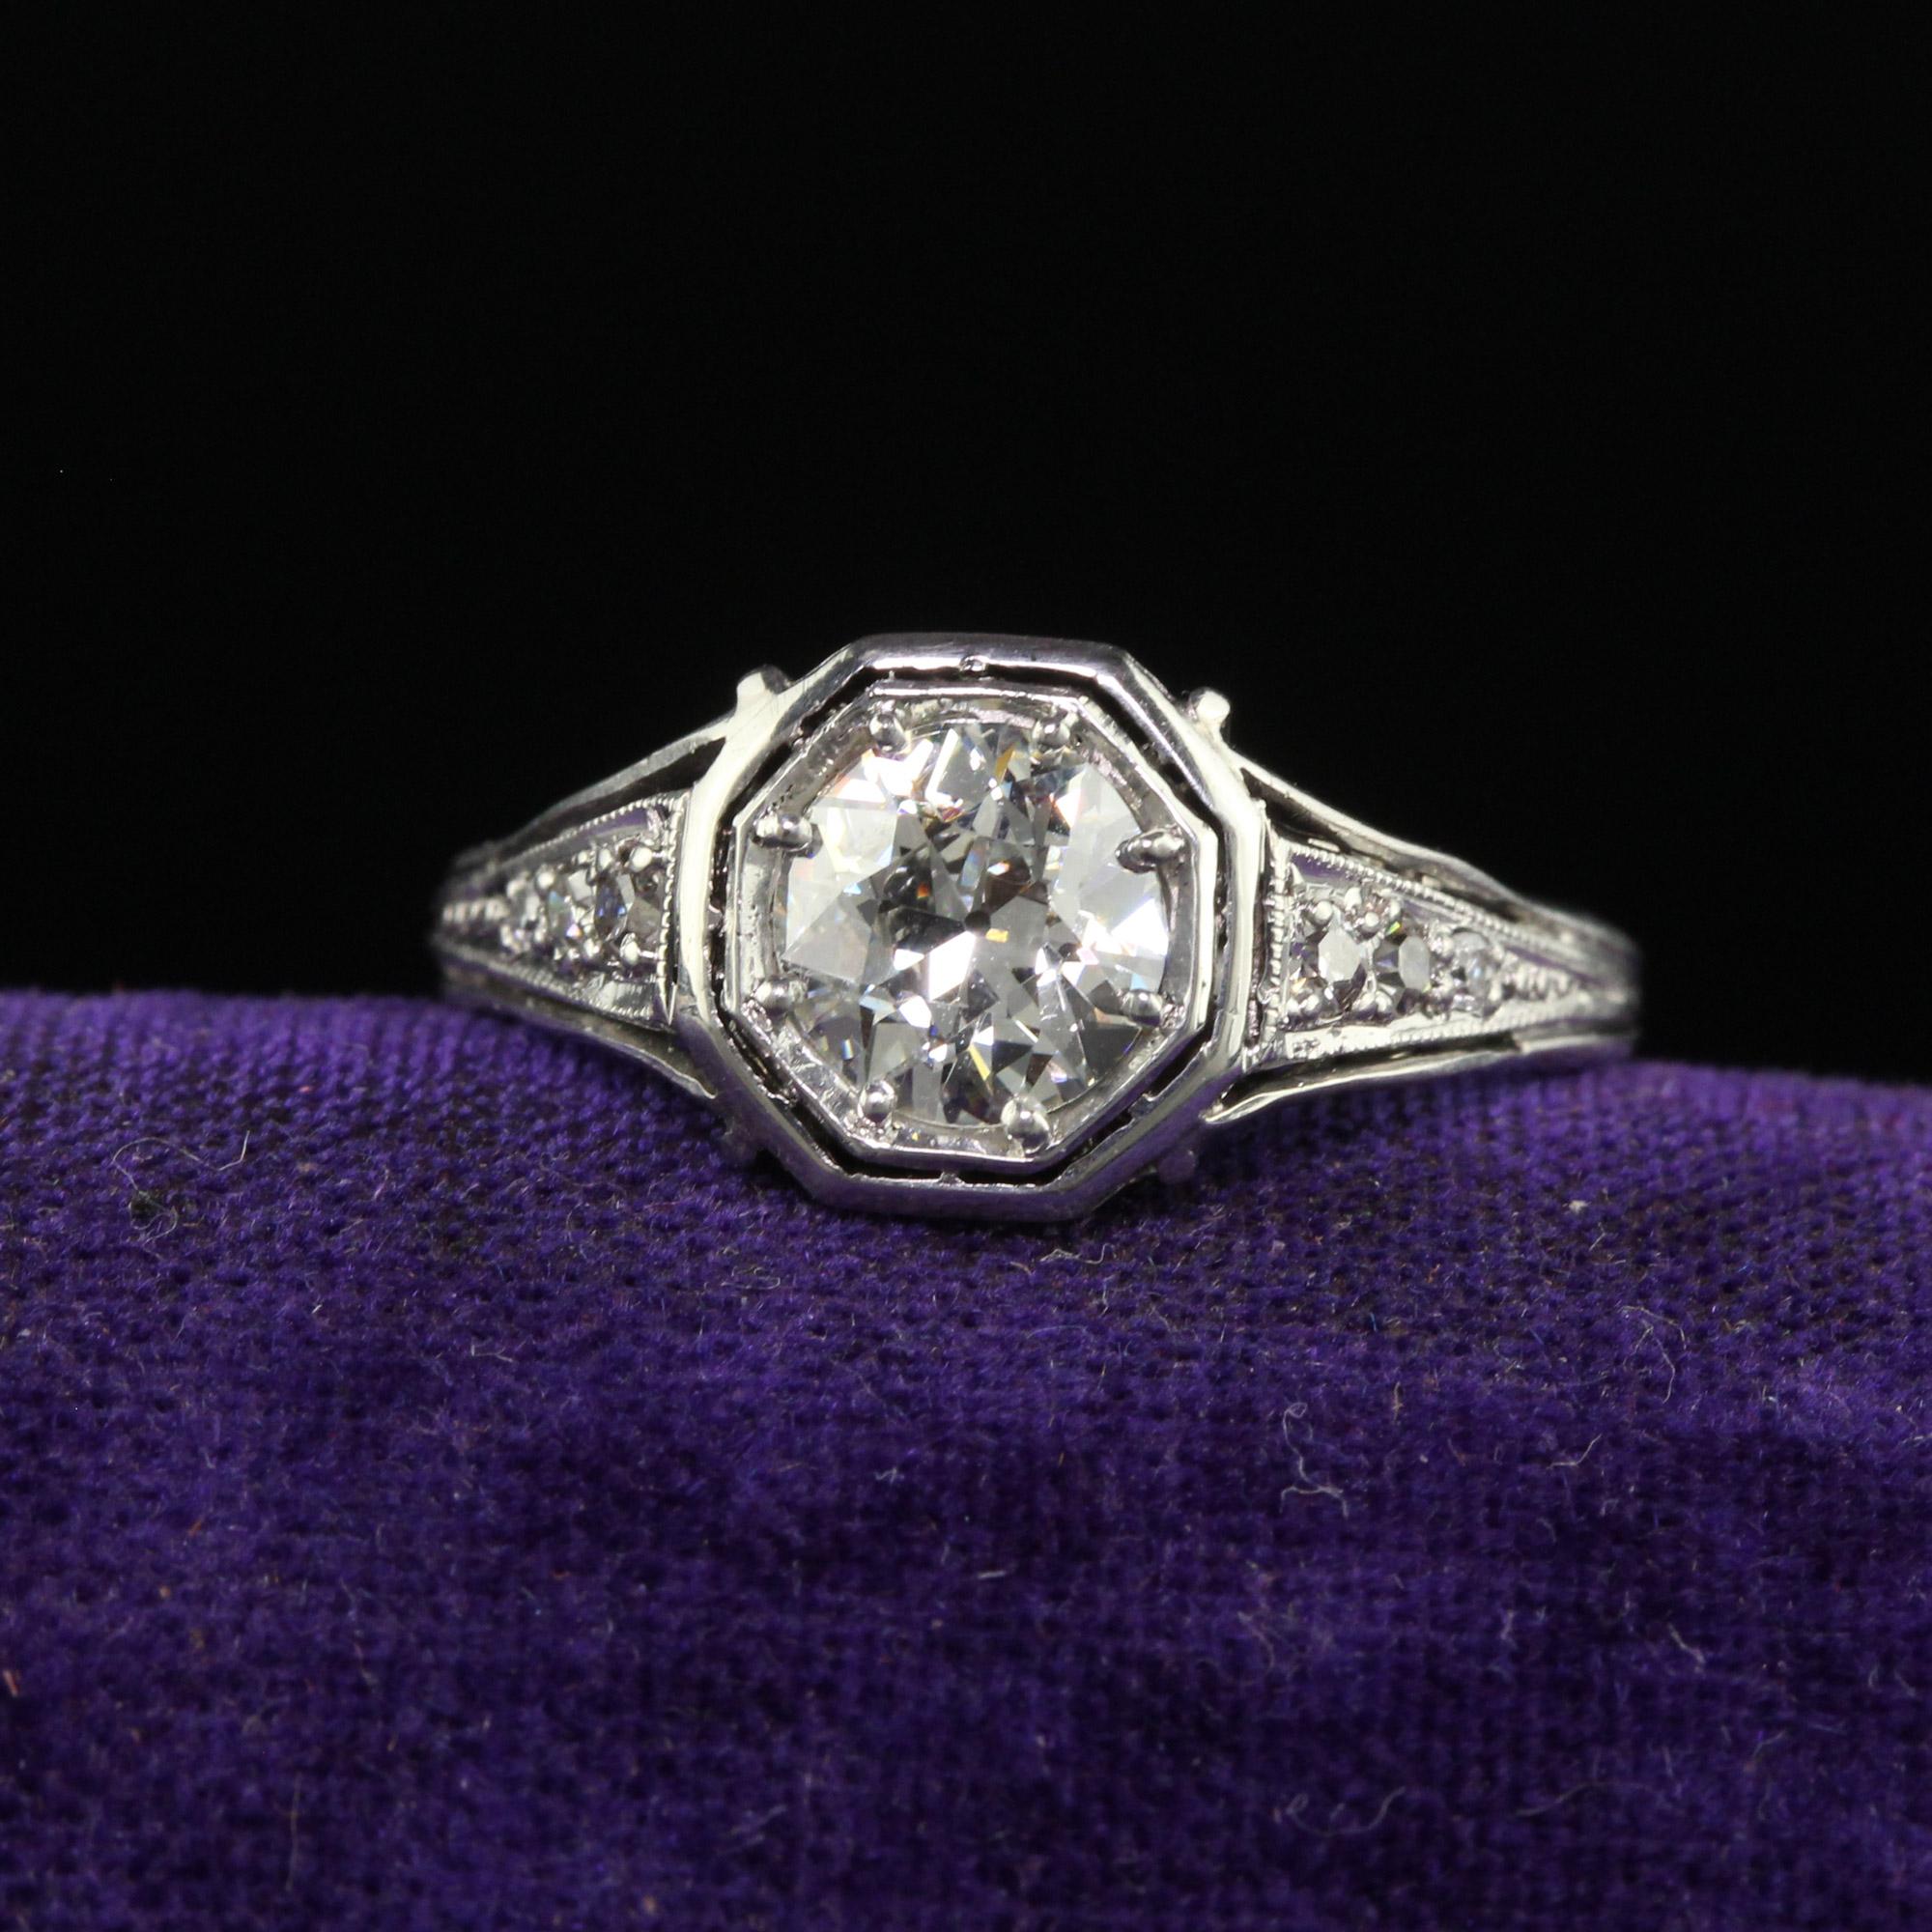 Beautiful Antique Art Deco Platinum Old European Cut Diamond Engagement Ring - GIA. This gorgeous art deco engagement ring is crafted in platinum. The center of this gorgeous ring is an Old European cut diamond that has a GIA report. The mounting is